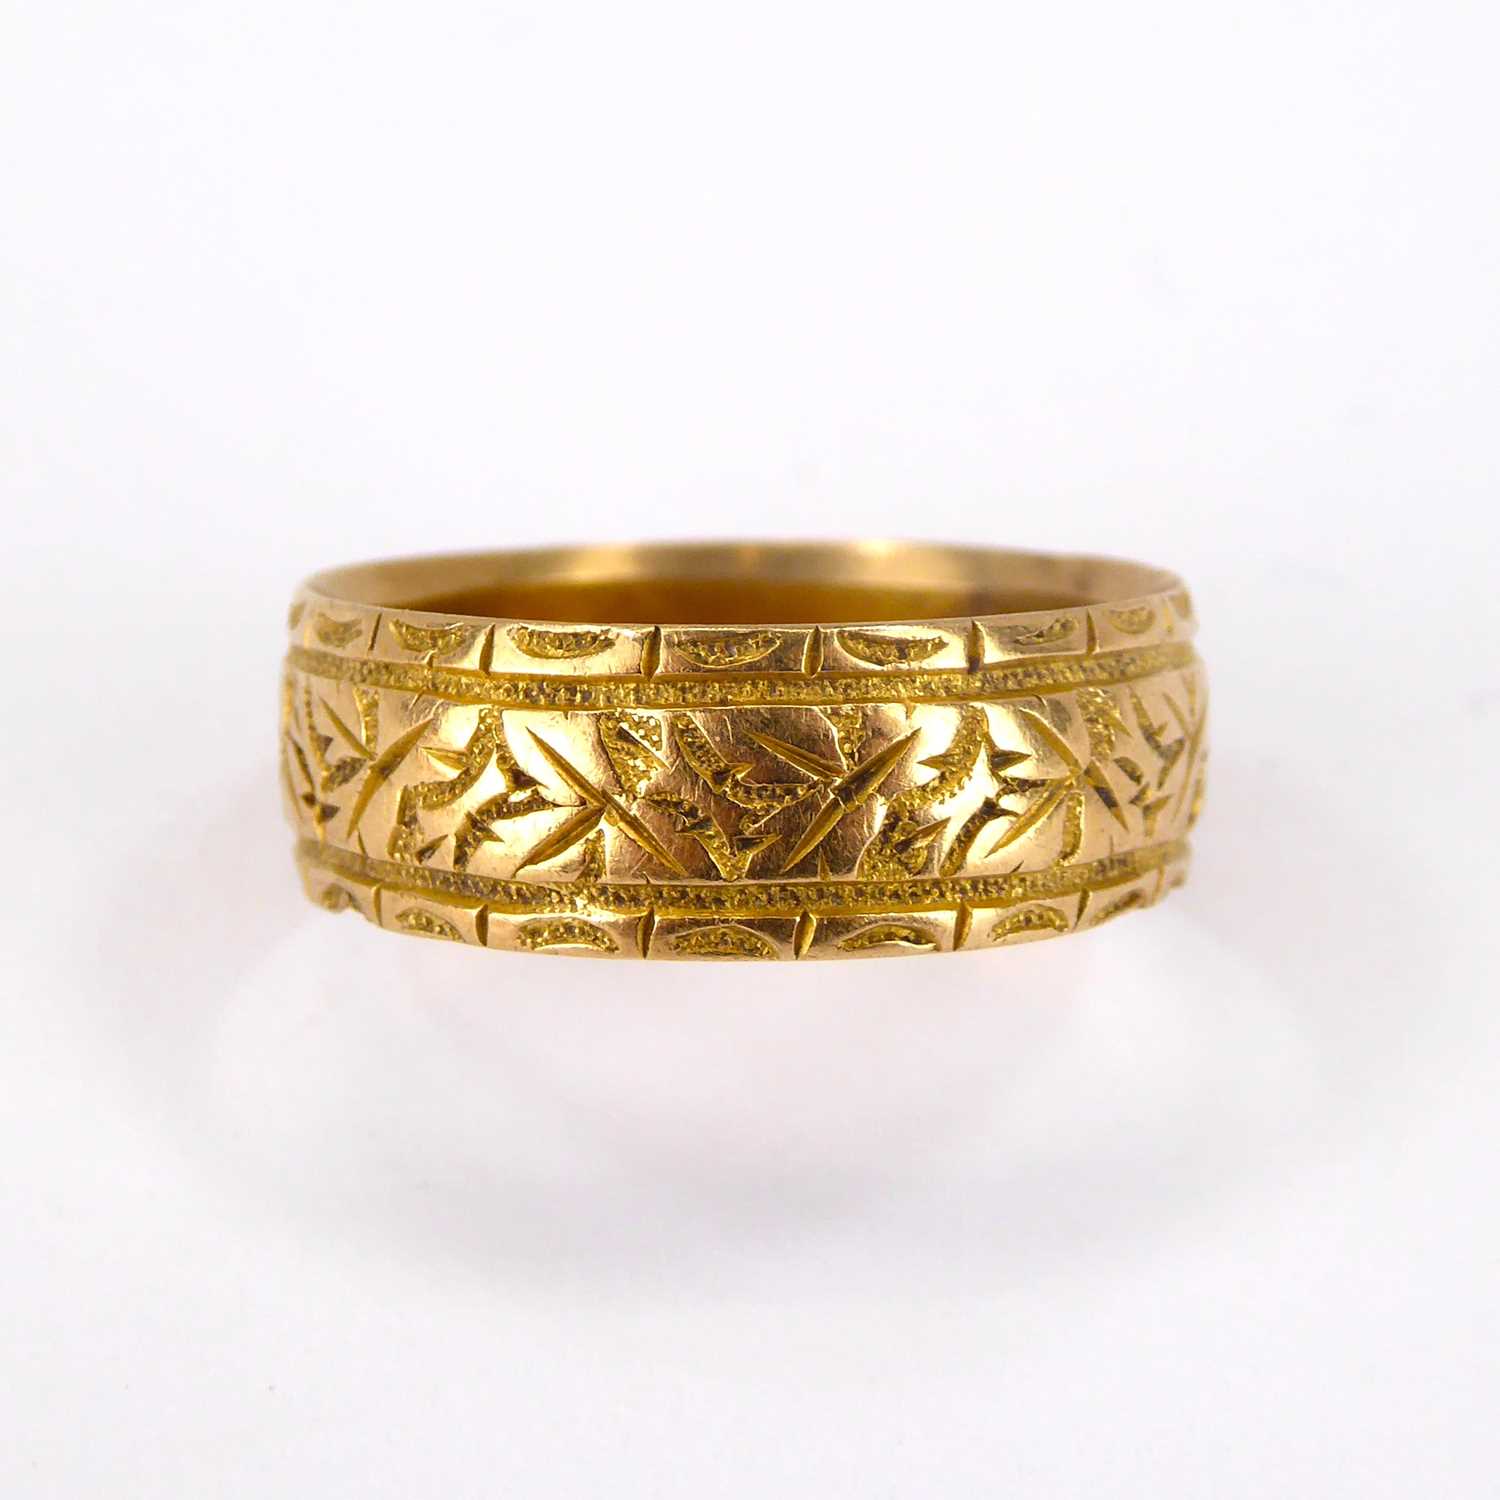 An 18ct gold band ring with textured pattern, size Q, approx. 4.2g.